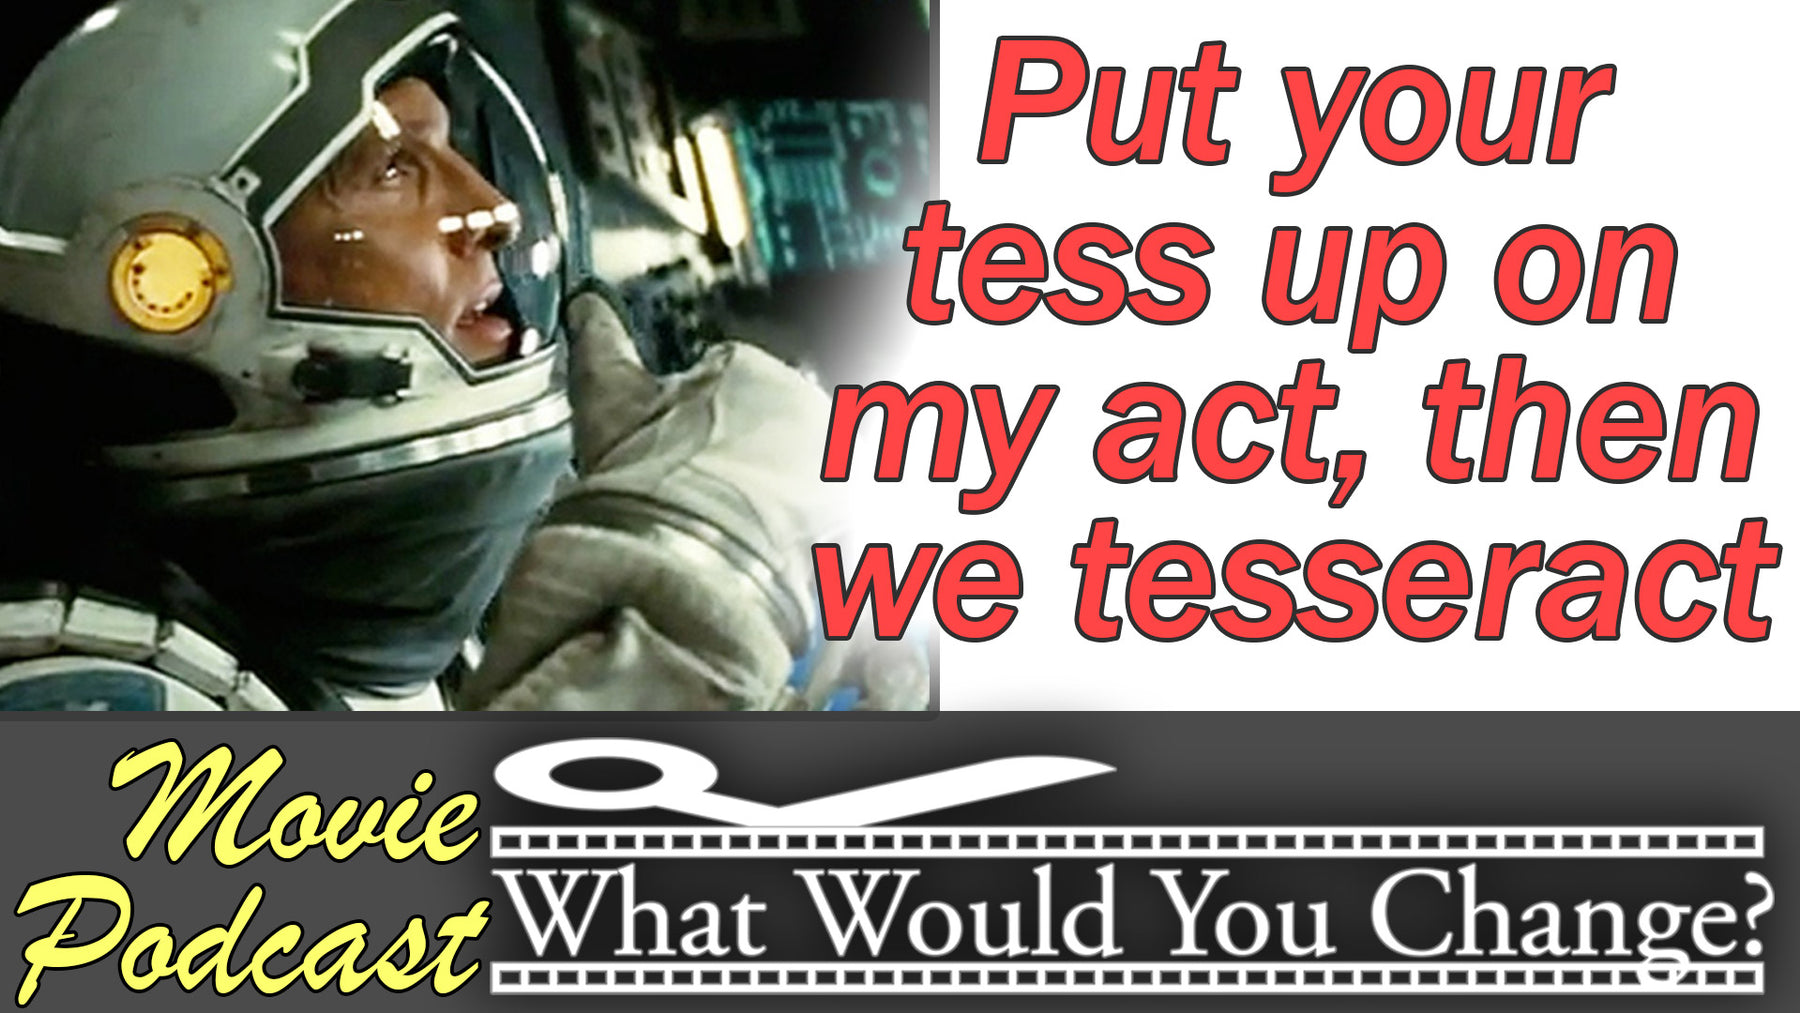 Interstellar | 2014 | What Would You Change? | Movie Podcast